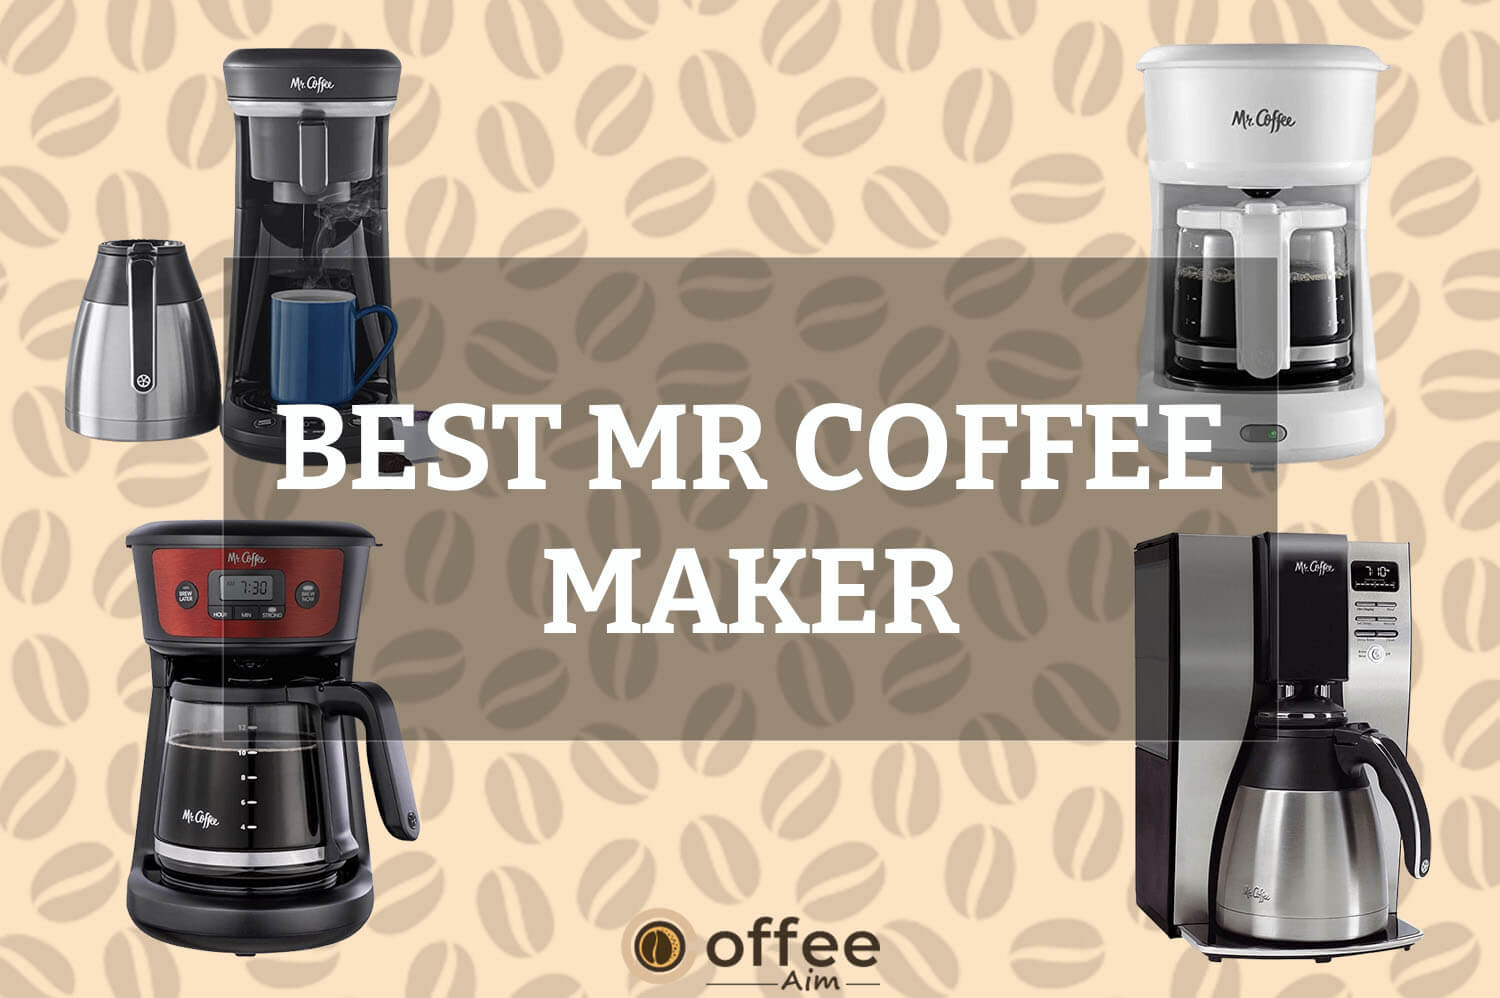 Featured image for the article "Best Mr Coffee Maker"